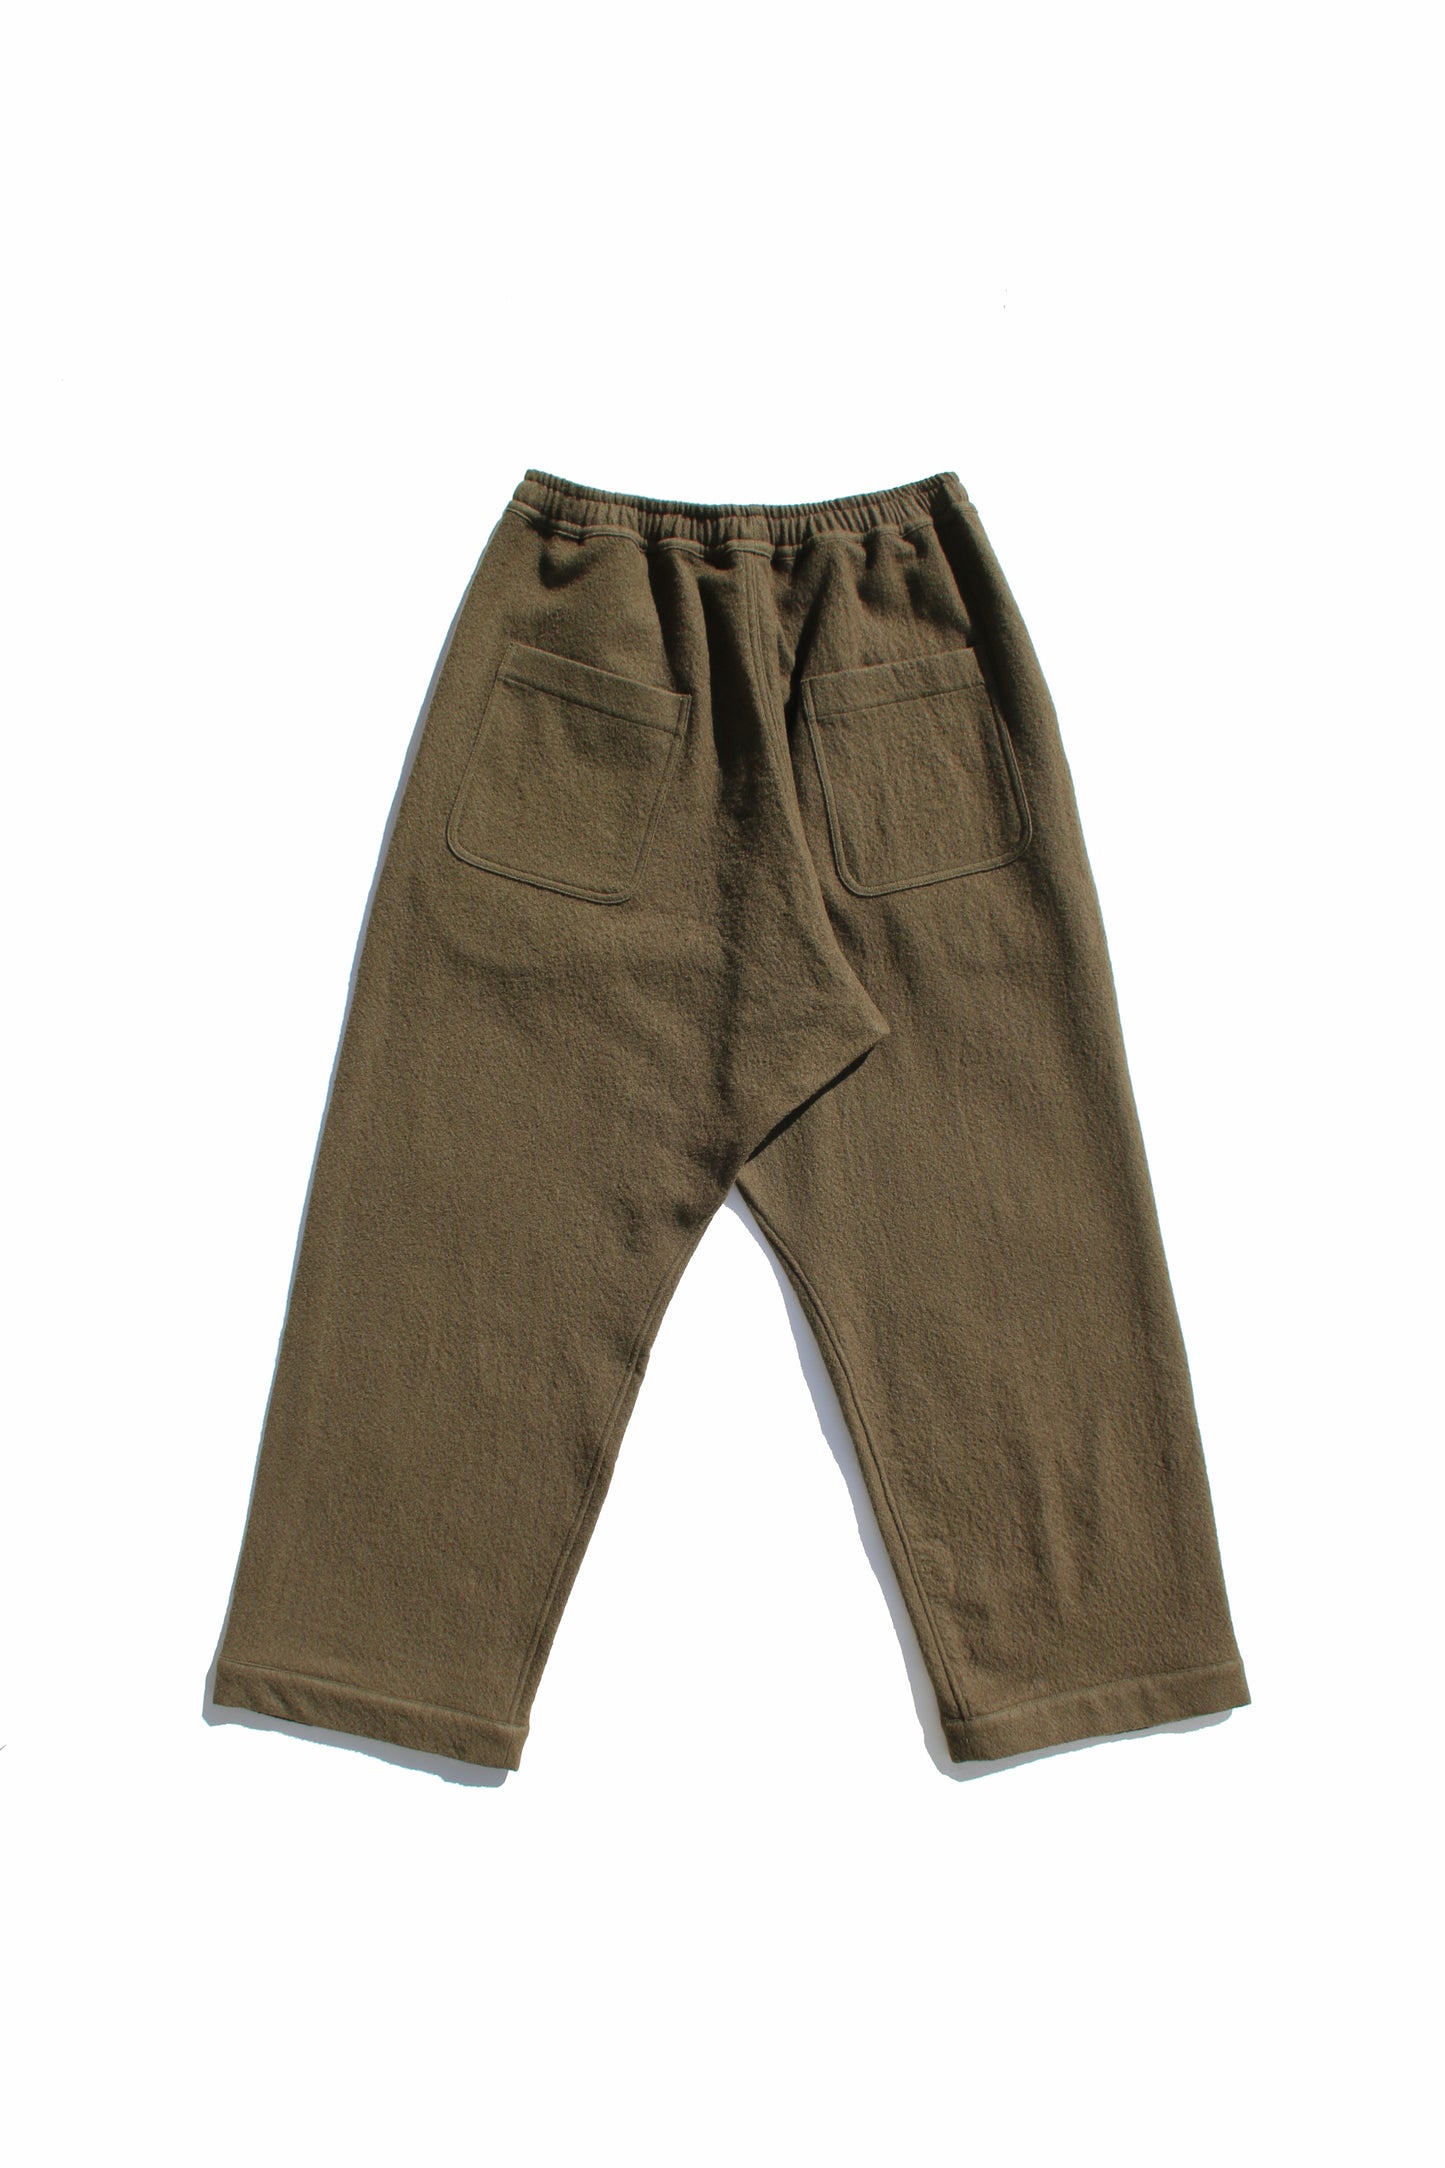 O PROJECT TEDDY WOOL TWILL JOGGING TROUSERS - ARMY GREEN